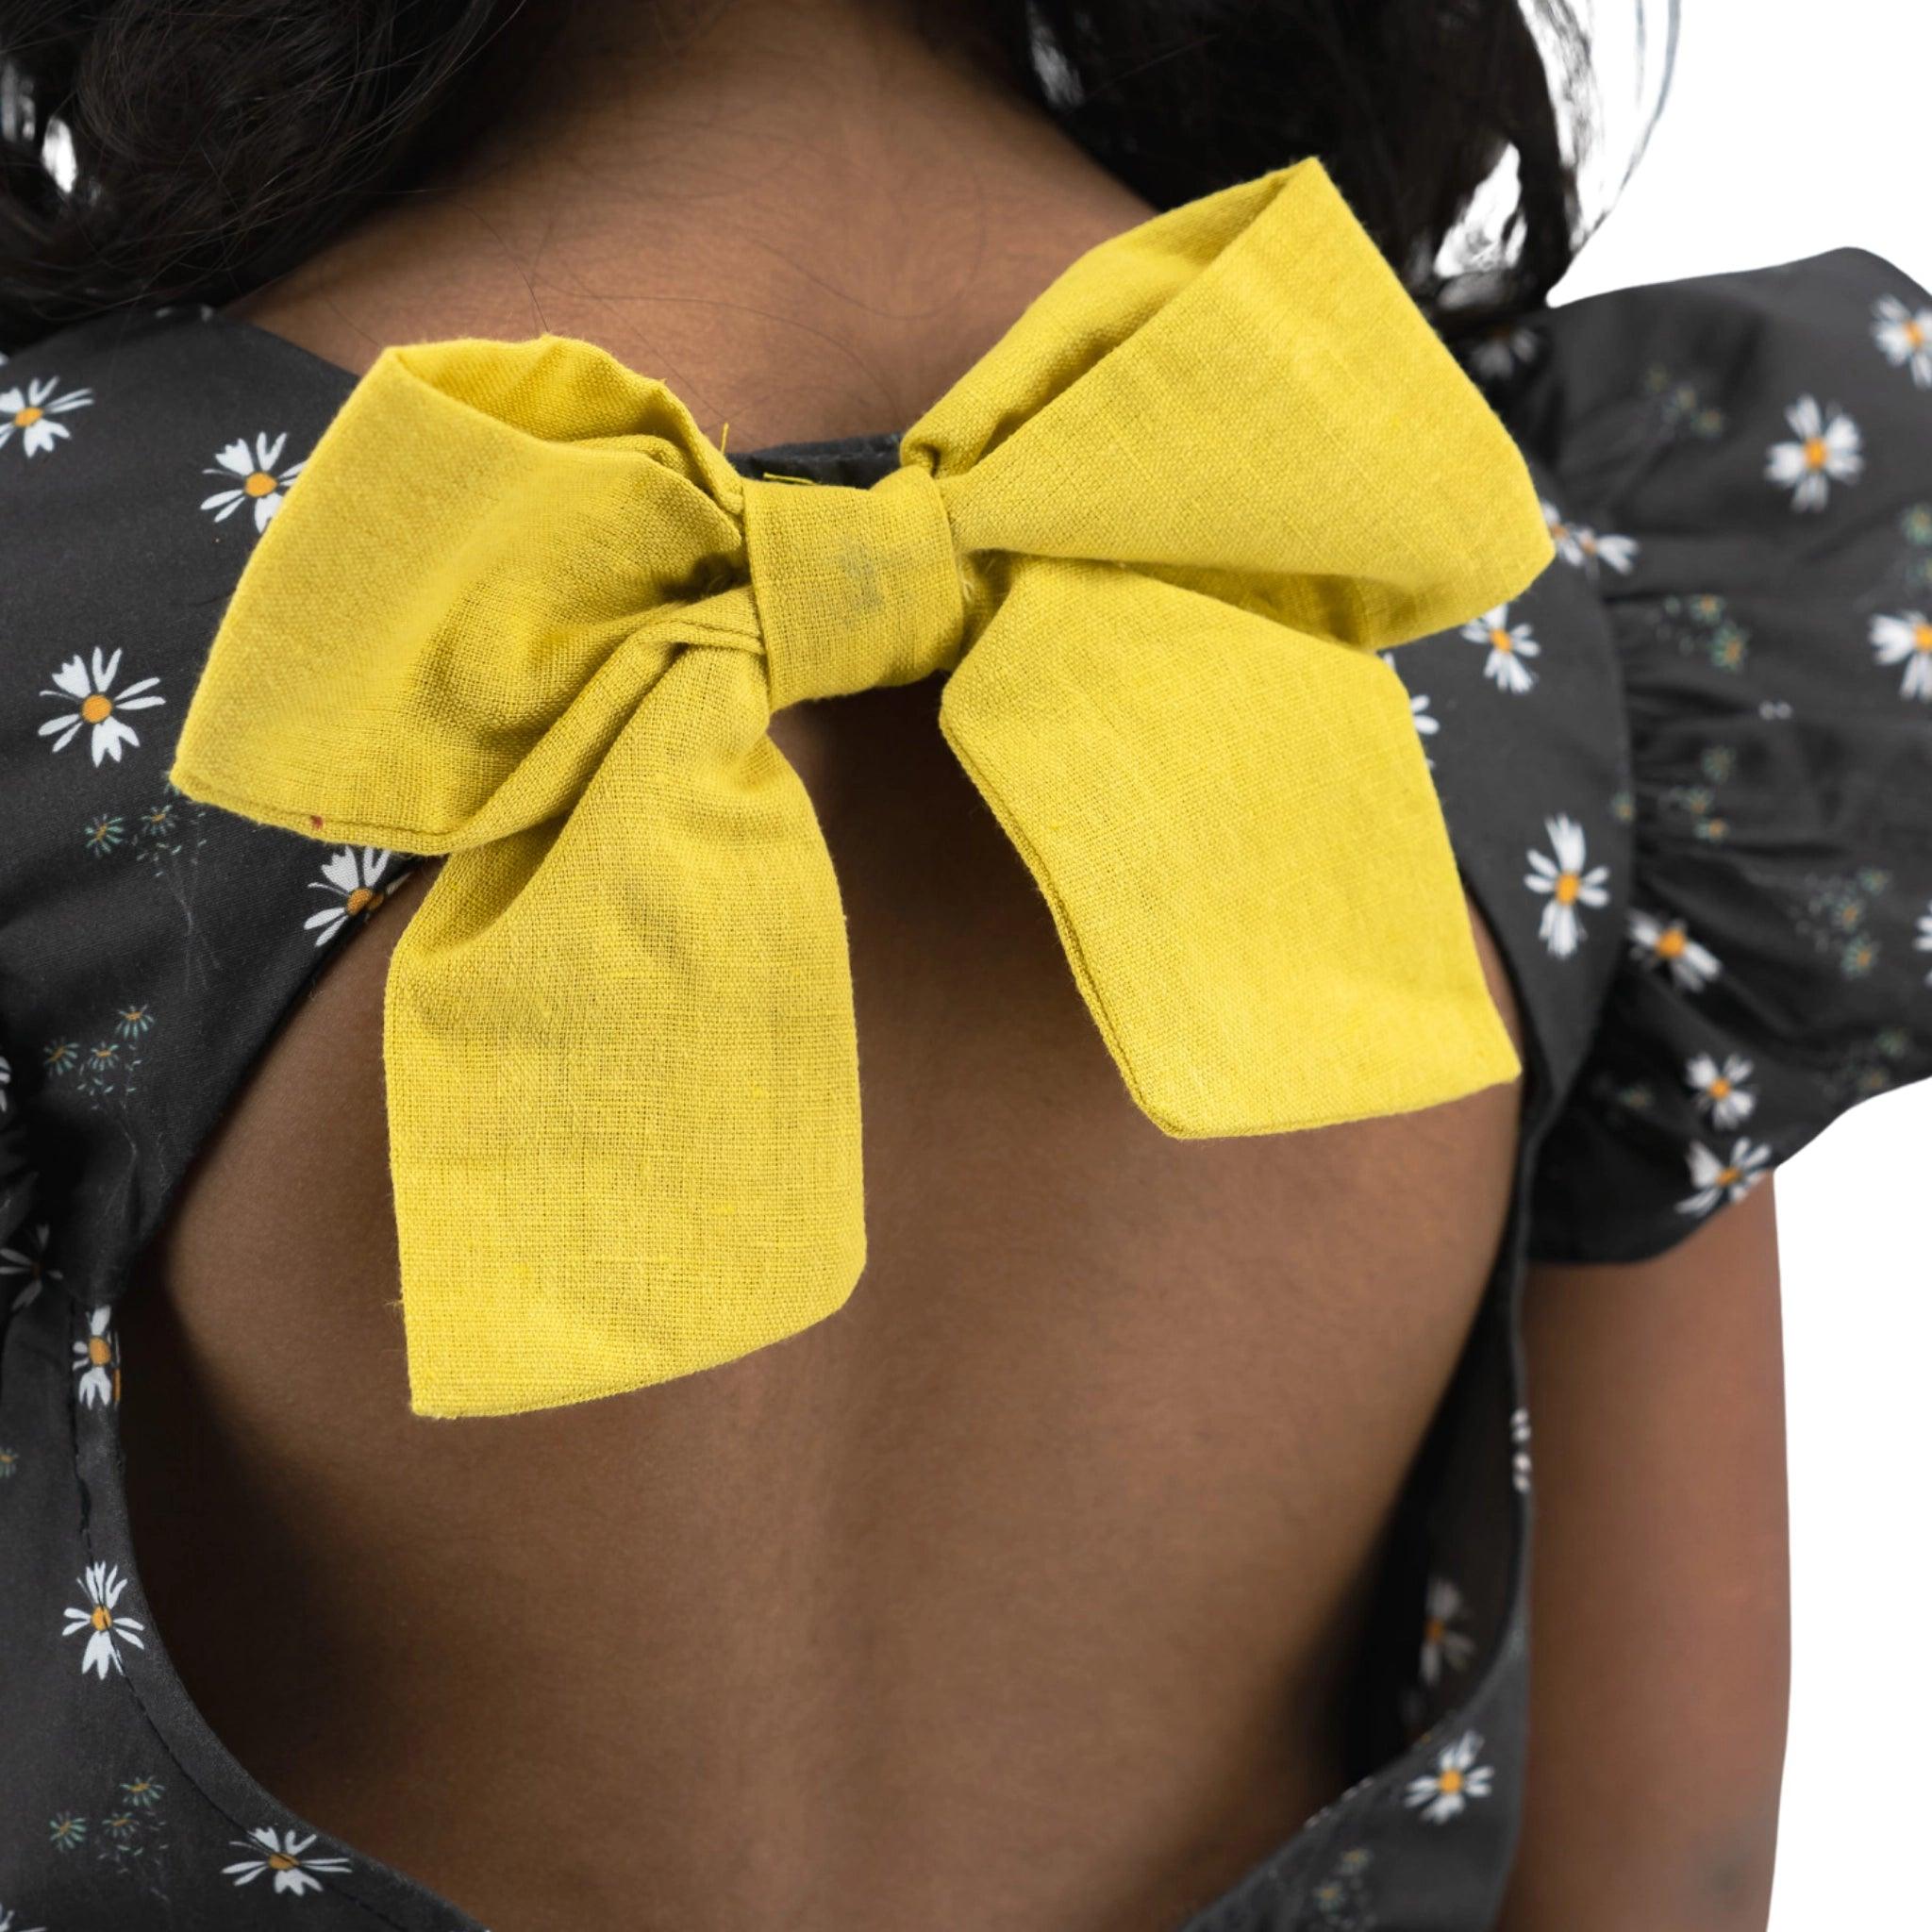 Close-up of a yellow bow tied at the back of a woman’s Petite Blossom Black Cotton Dress by Karee, focusing on the bow detail with part of her hair visible.